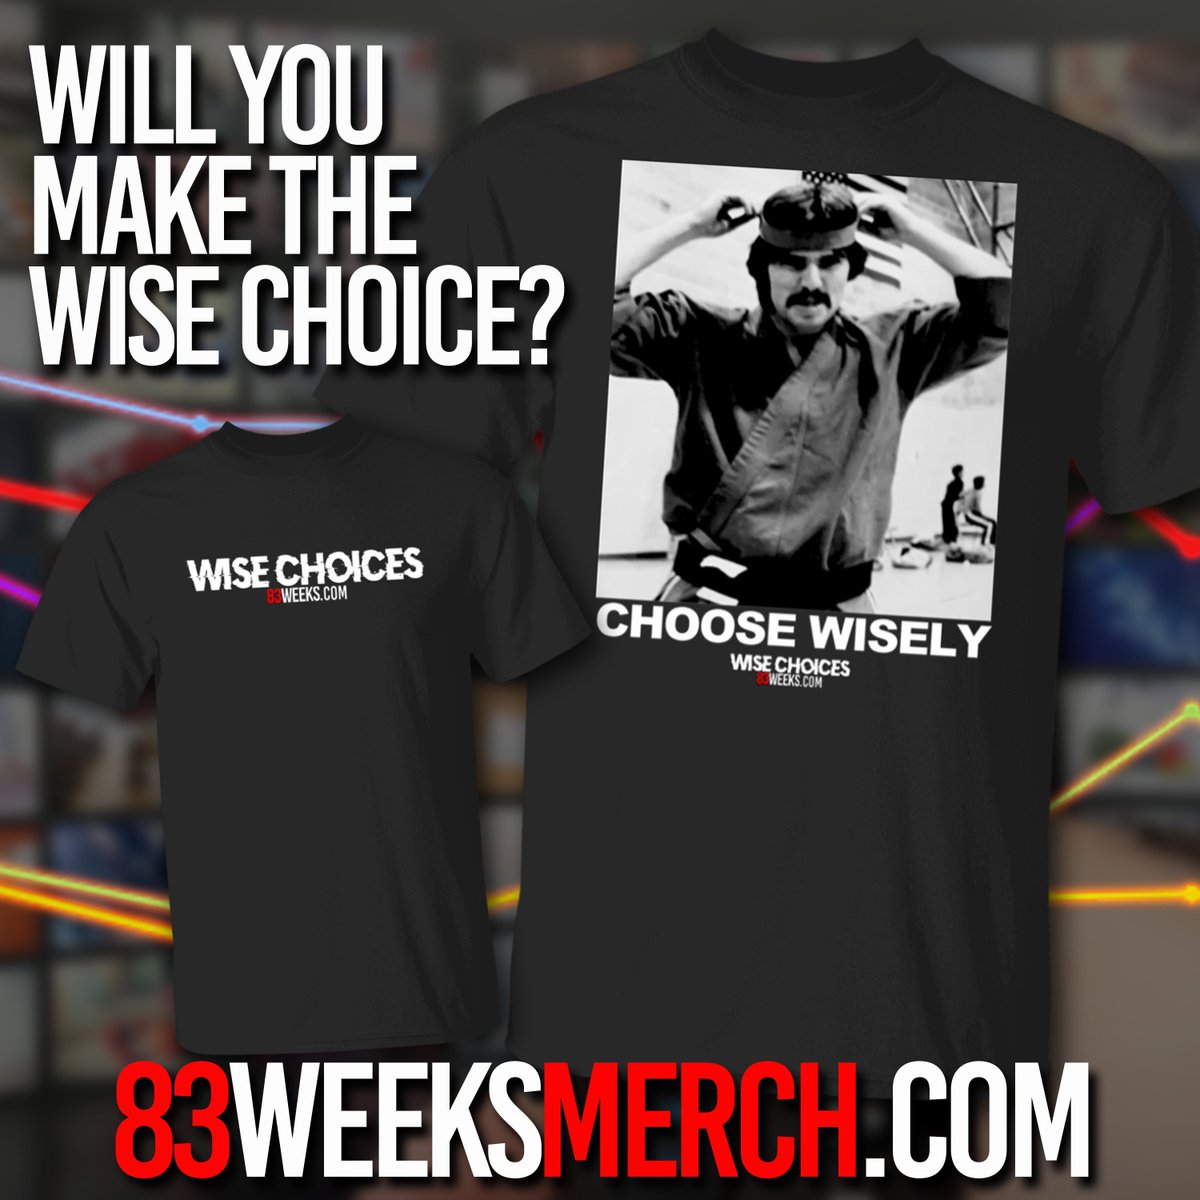 Grab these BRAND NEW #wisechoices tees today!